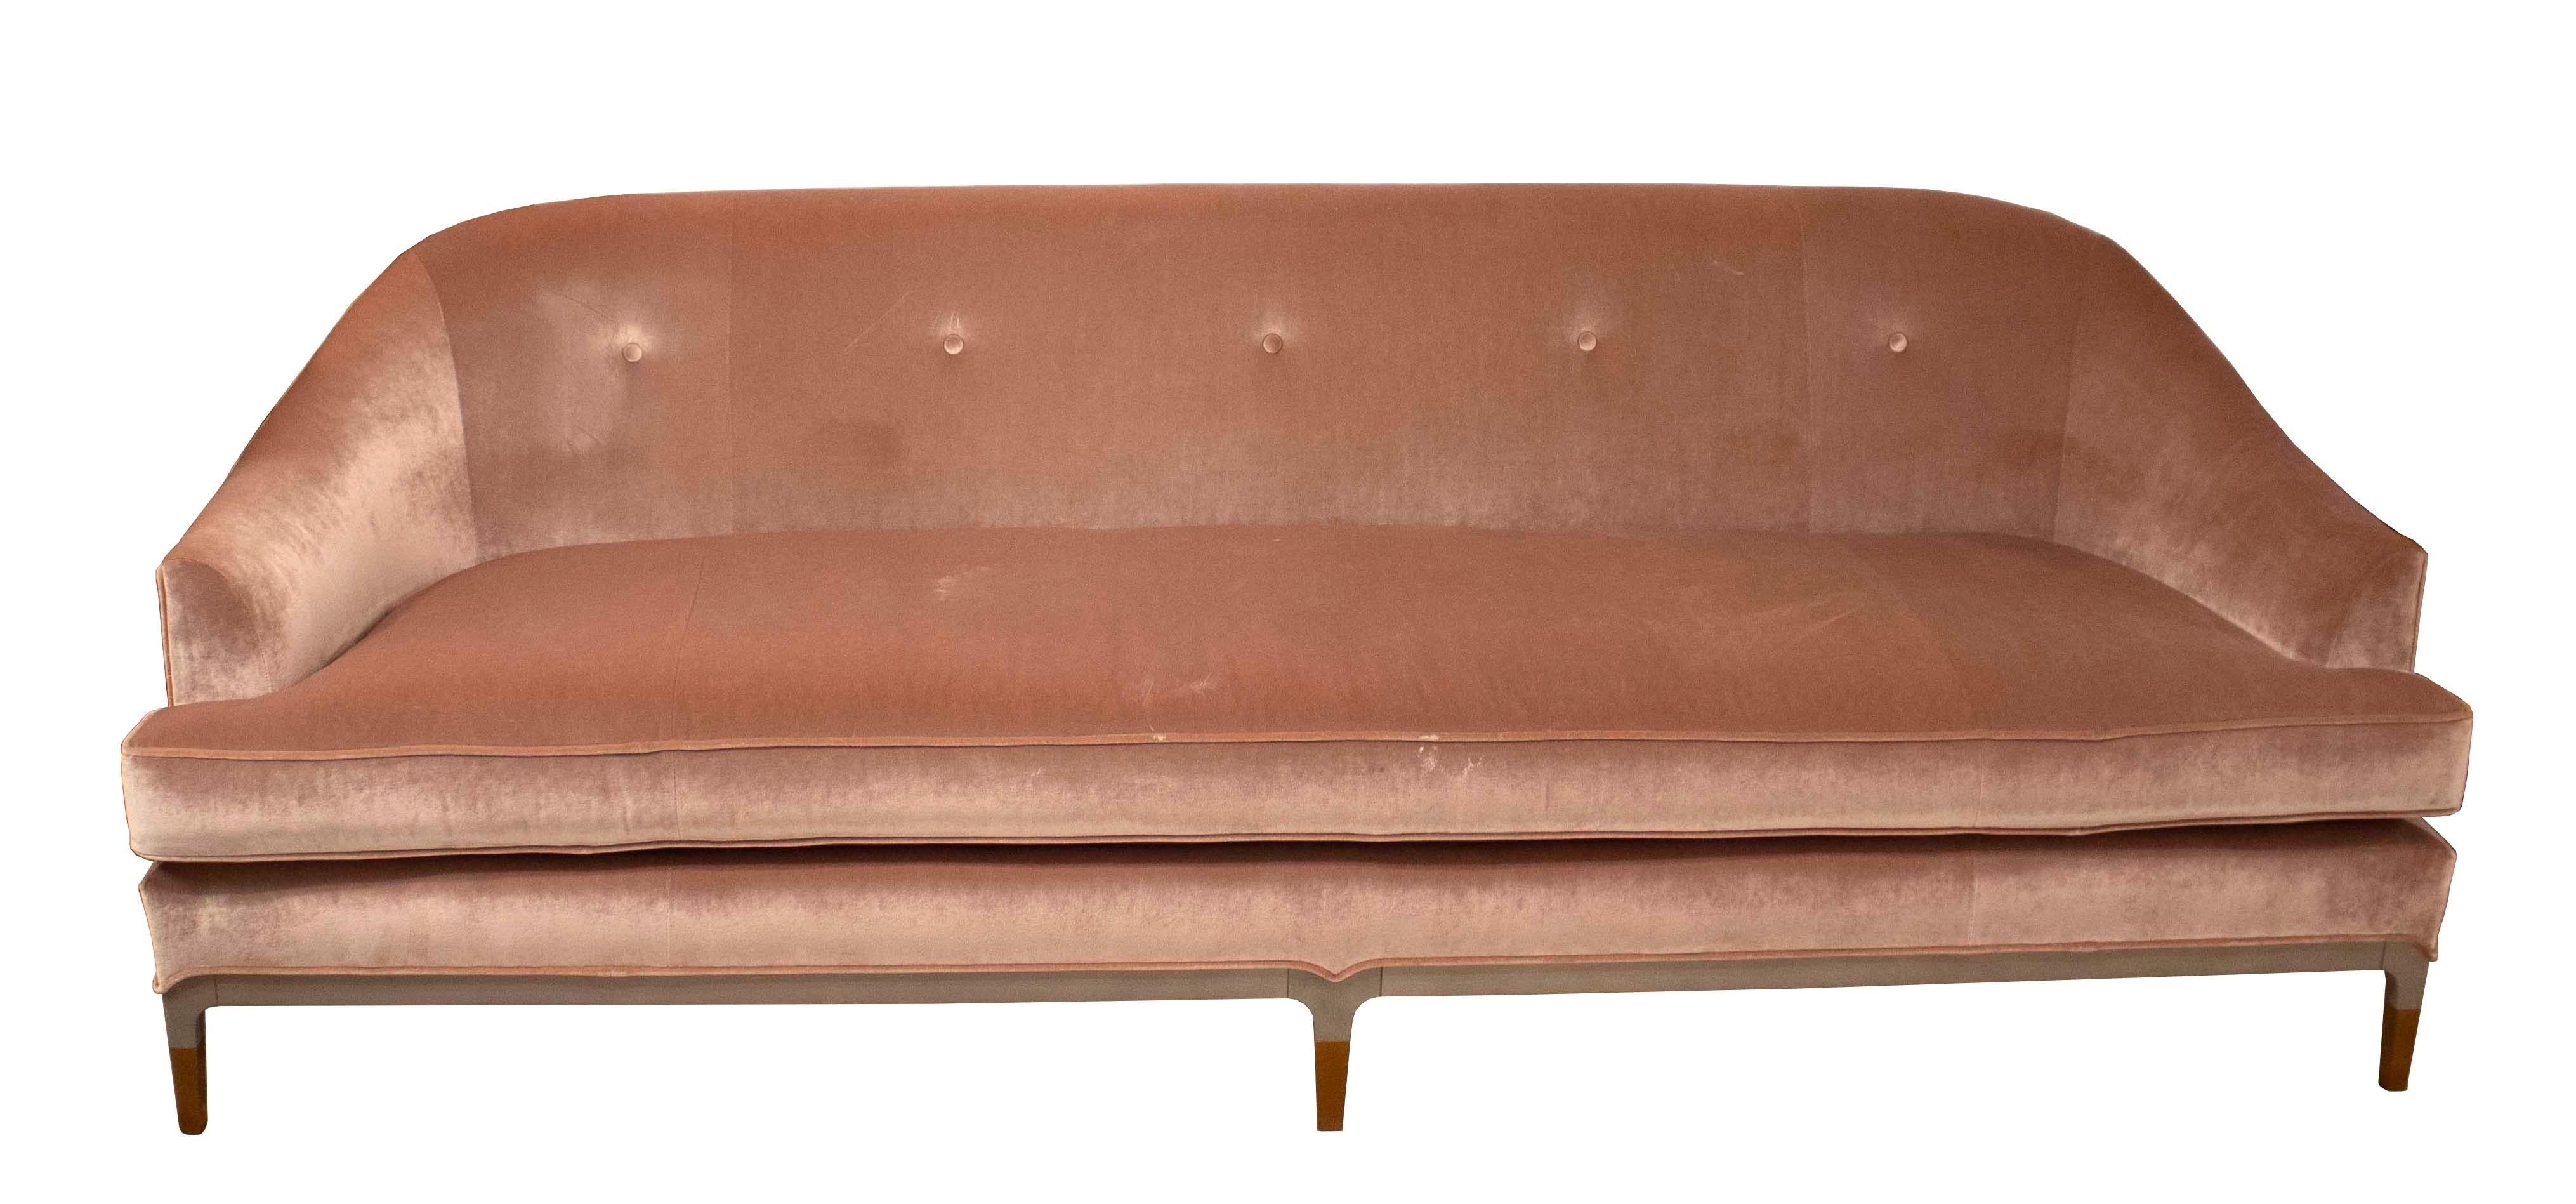 This 3-seat sofa was designed by Jean-Louis Denoit for Baker and is upholstered in a sophisticated blush velvet with the legs and frame in both a nougat wood and an antique bronze finish. The curved back and attention to detail makes this vintage